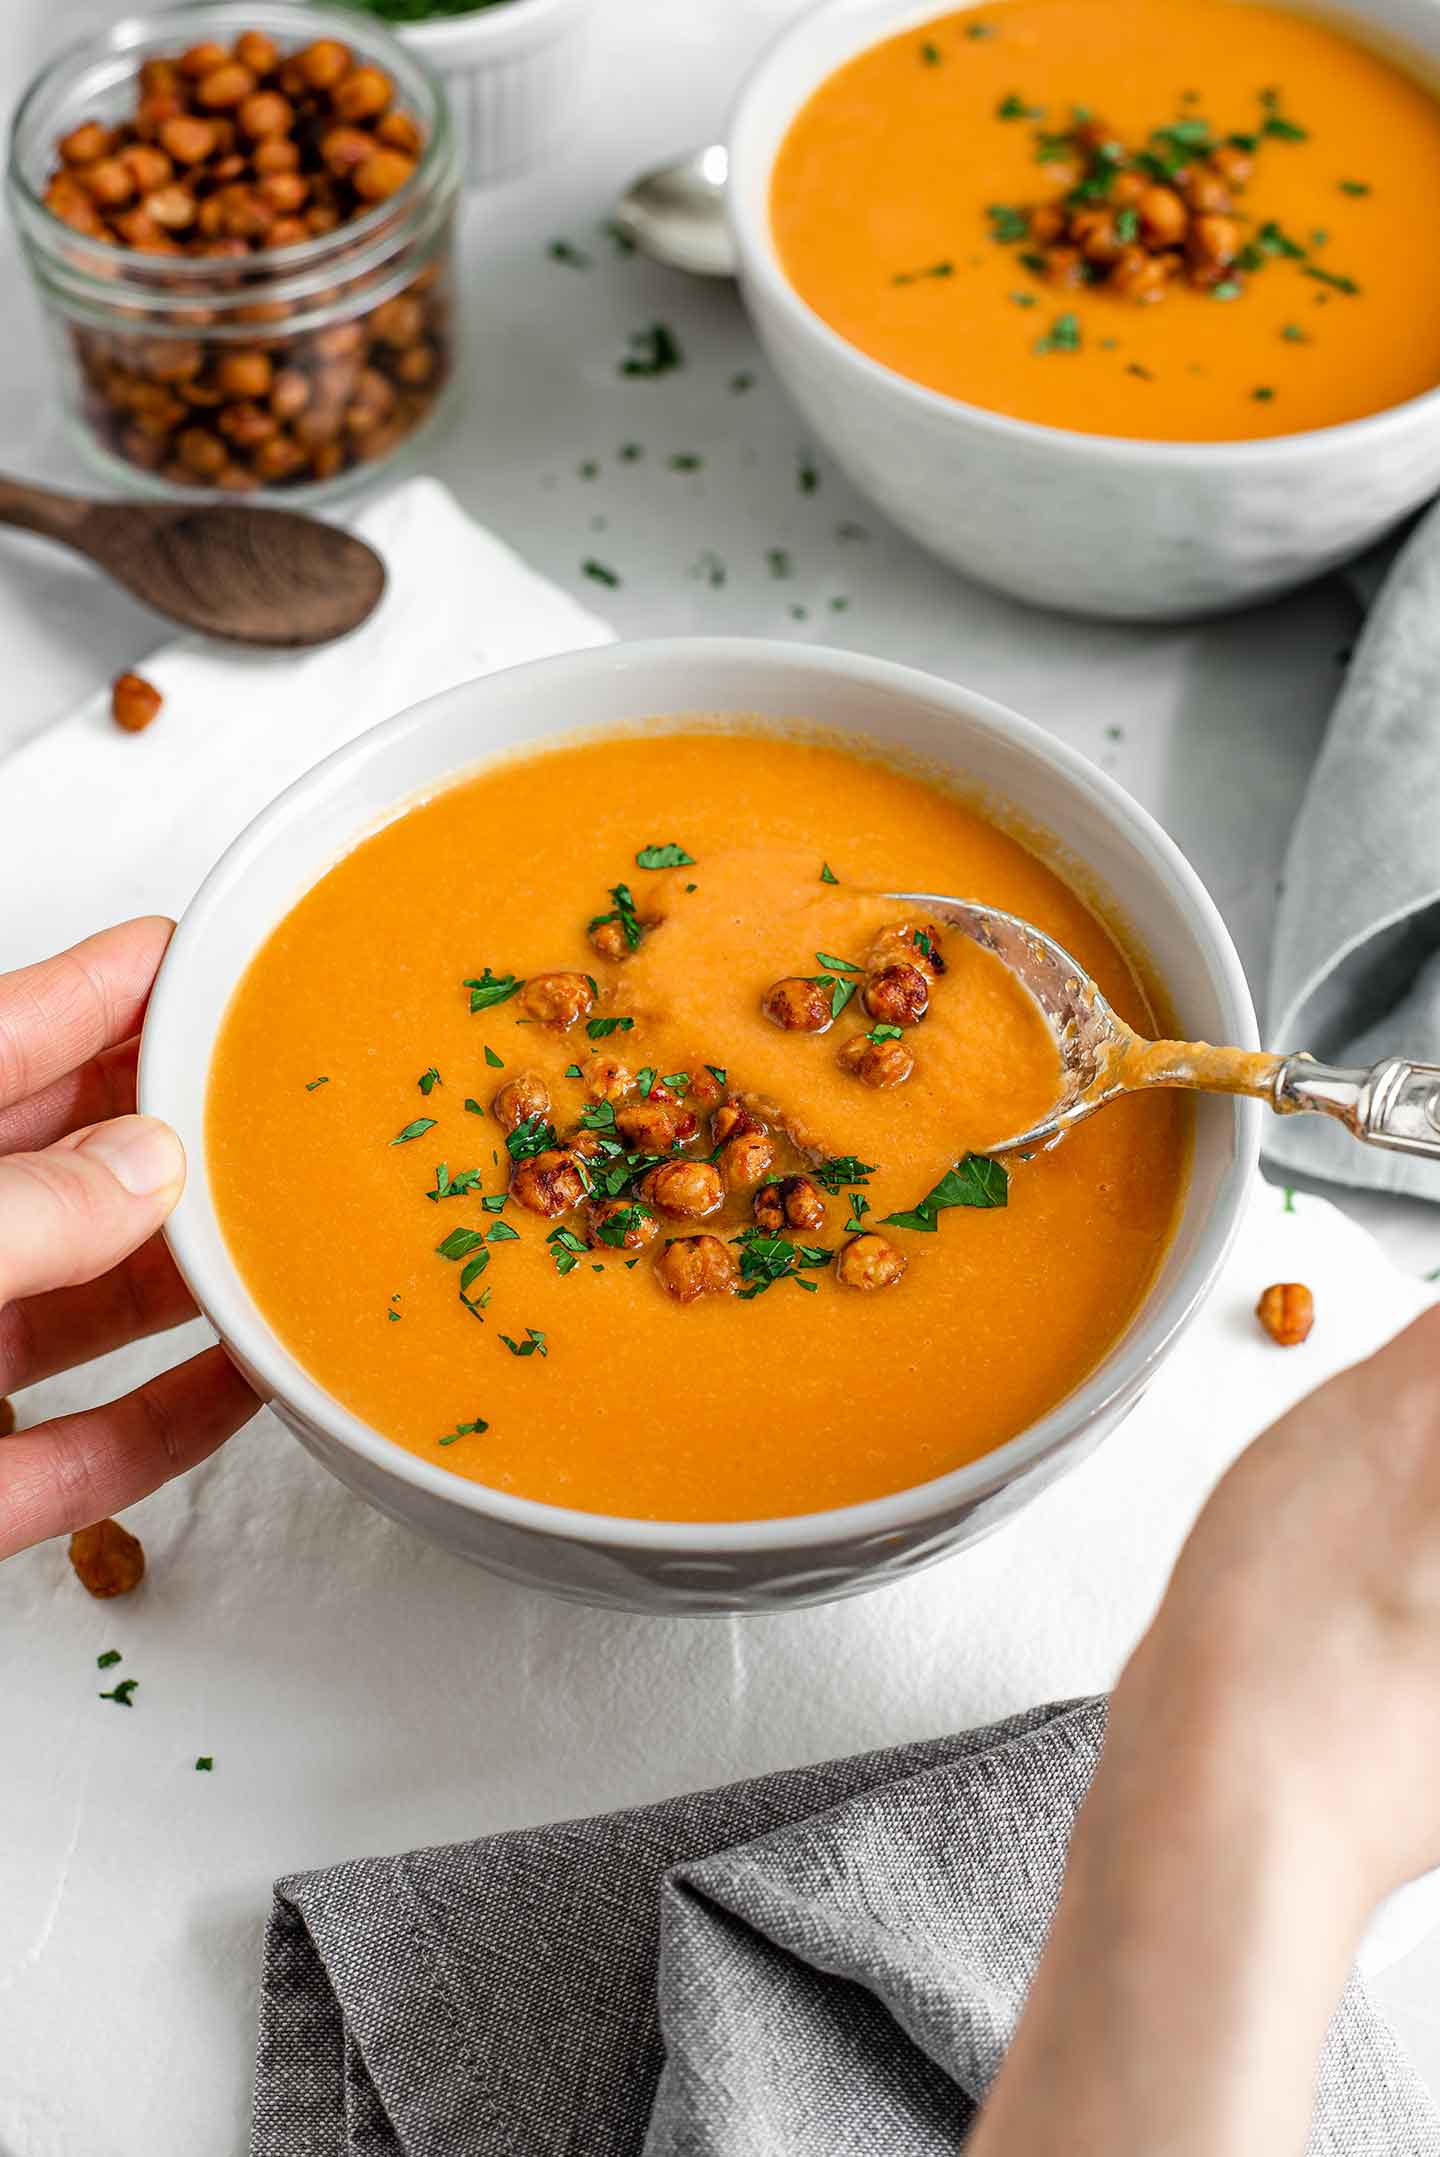 Side view of a hand dipping a spoon into the bright orange, creamy soup. The soup is thick and topped with crispy roasted chickpeas.